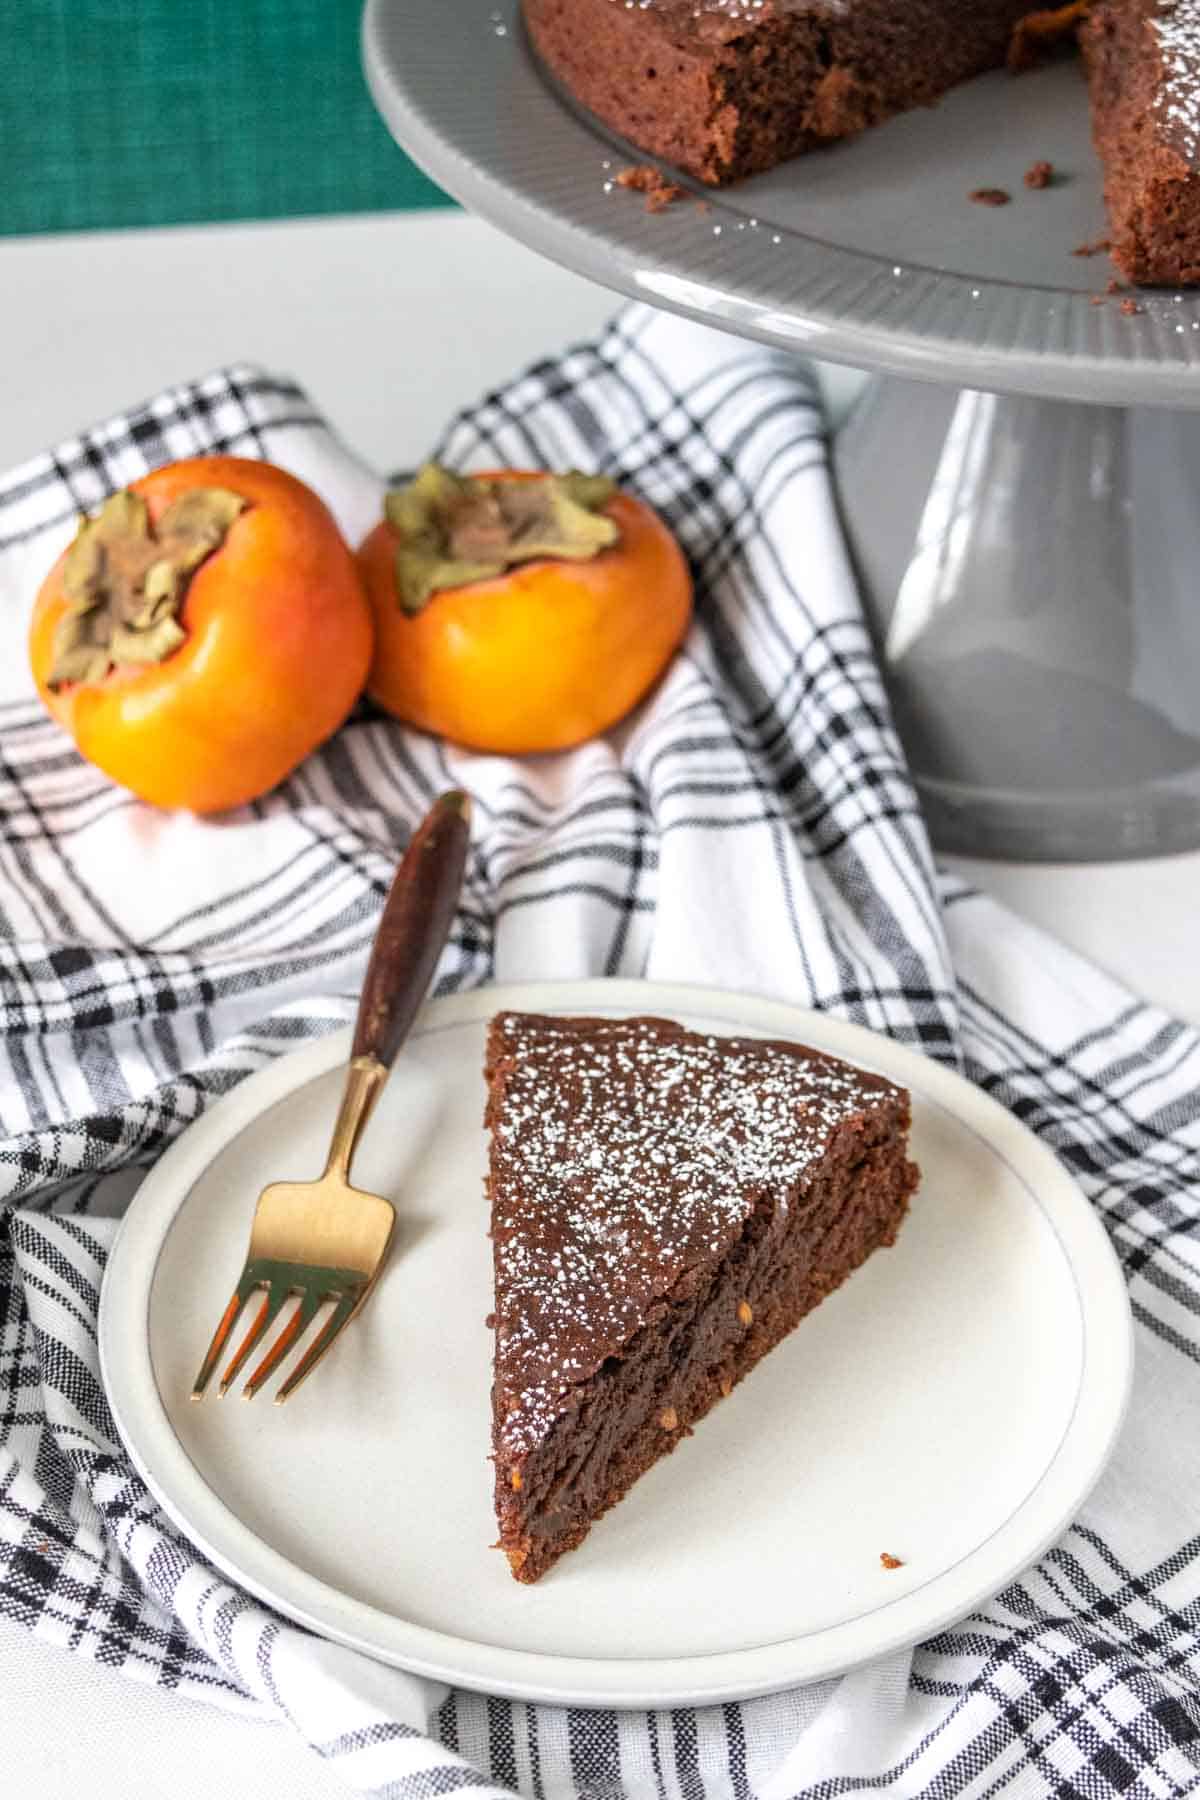 Slice of chocolate persimmon cake on a gray plate with a black plaid napkin.